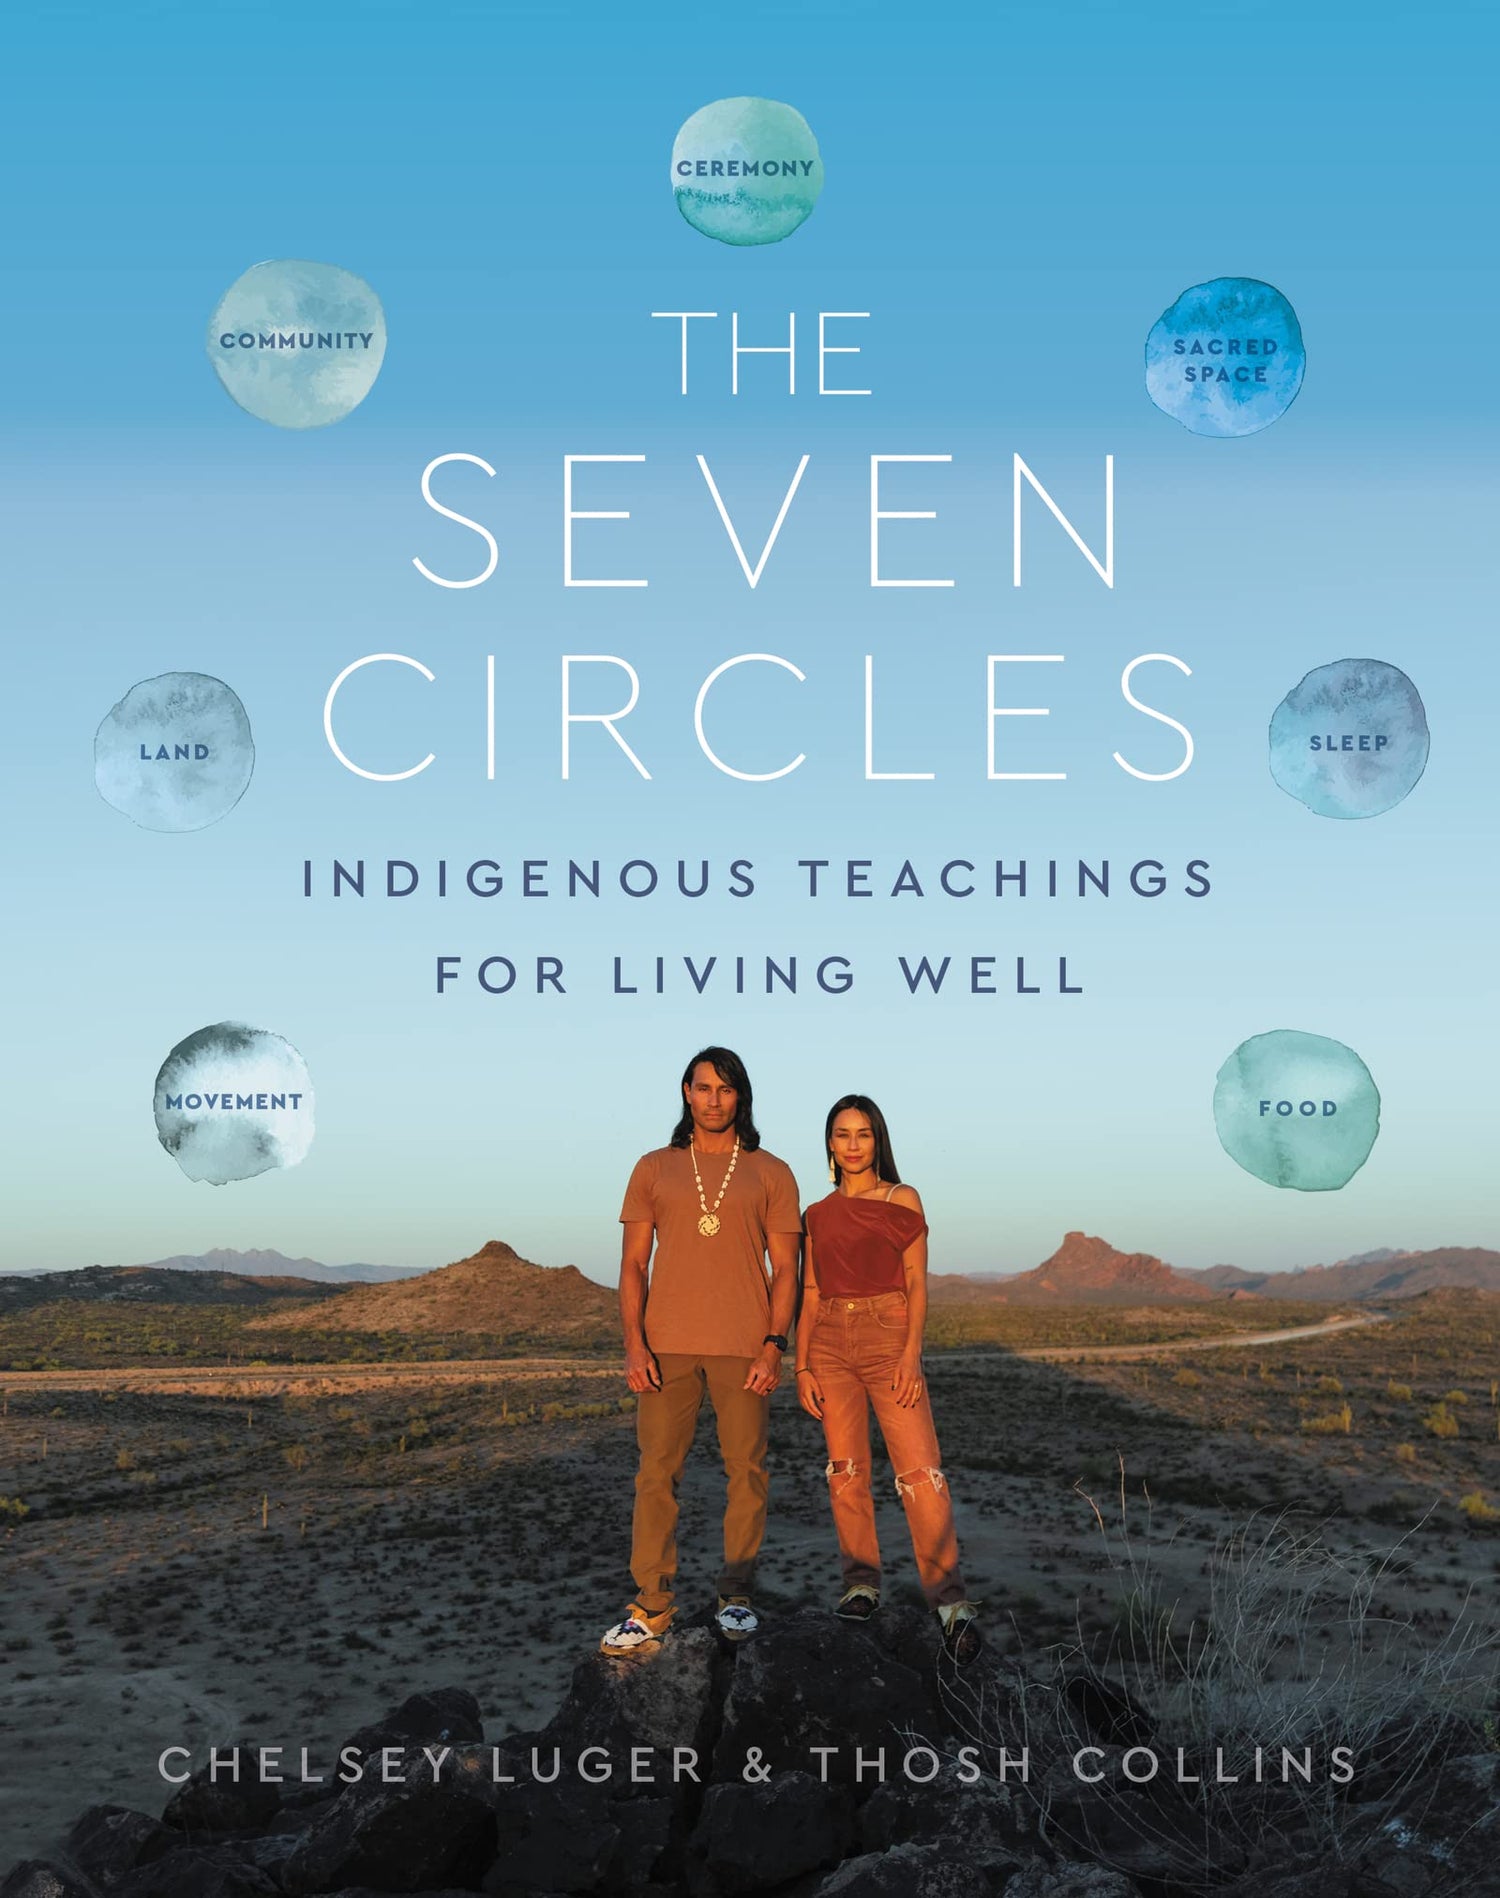 In this revolutionary self-help guide, two beloved Native American wellness activists offer wisdom for achieving spiritual, physical, and emotional wellbeing rooted in Indigenous ancestral knowledge.